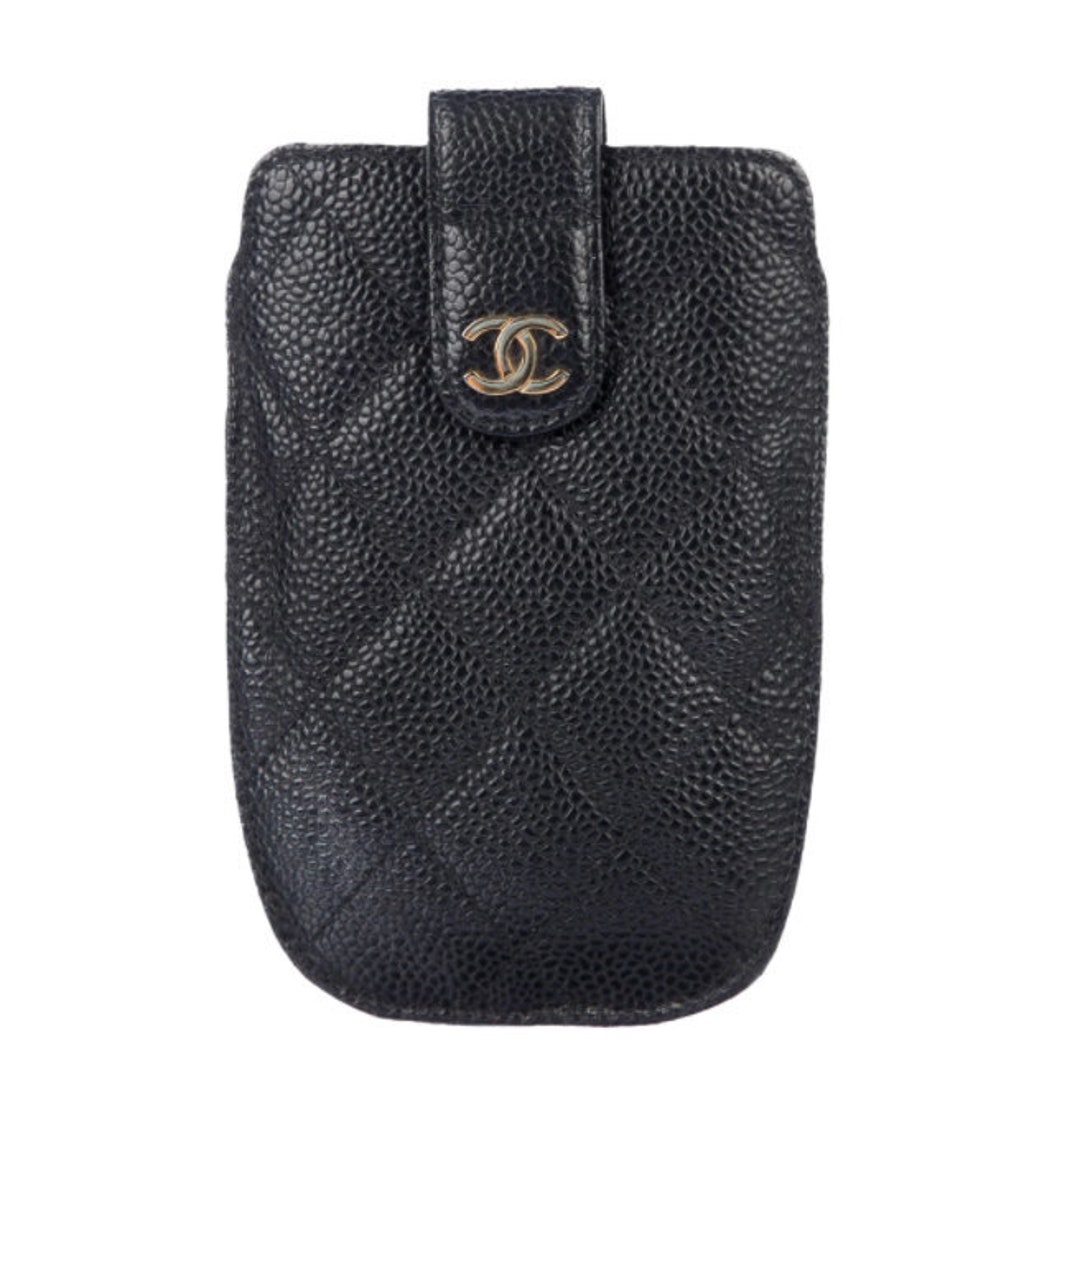 Auth CHANEL Matelasse XS Max iPhone Case Caviar Skin Leather Black US  SELLER